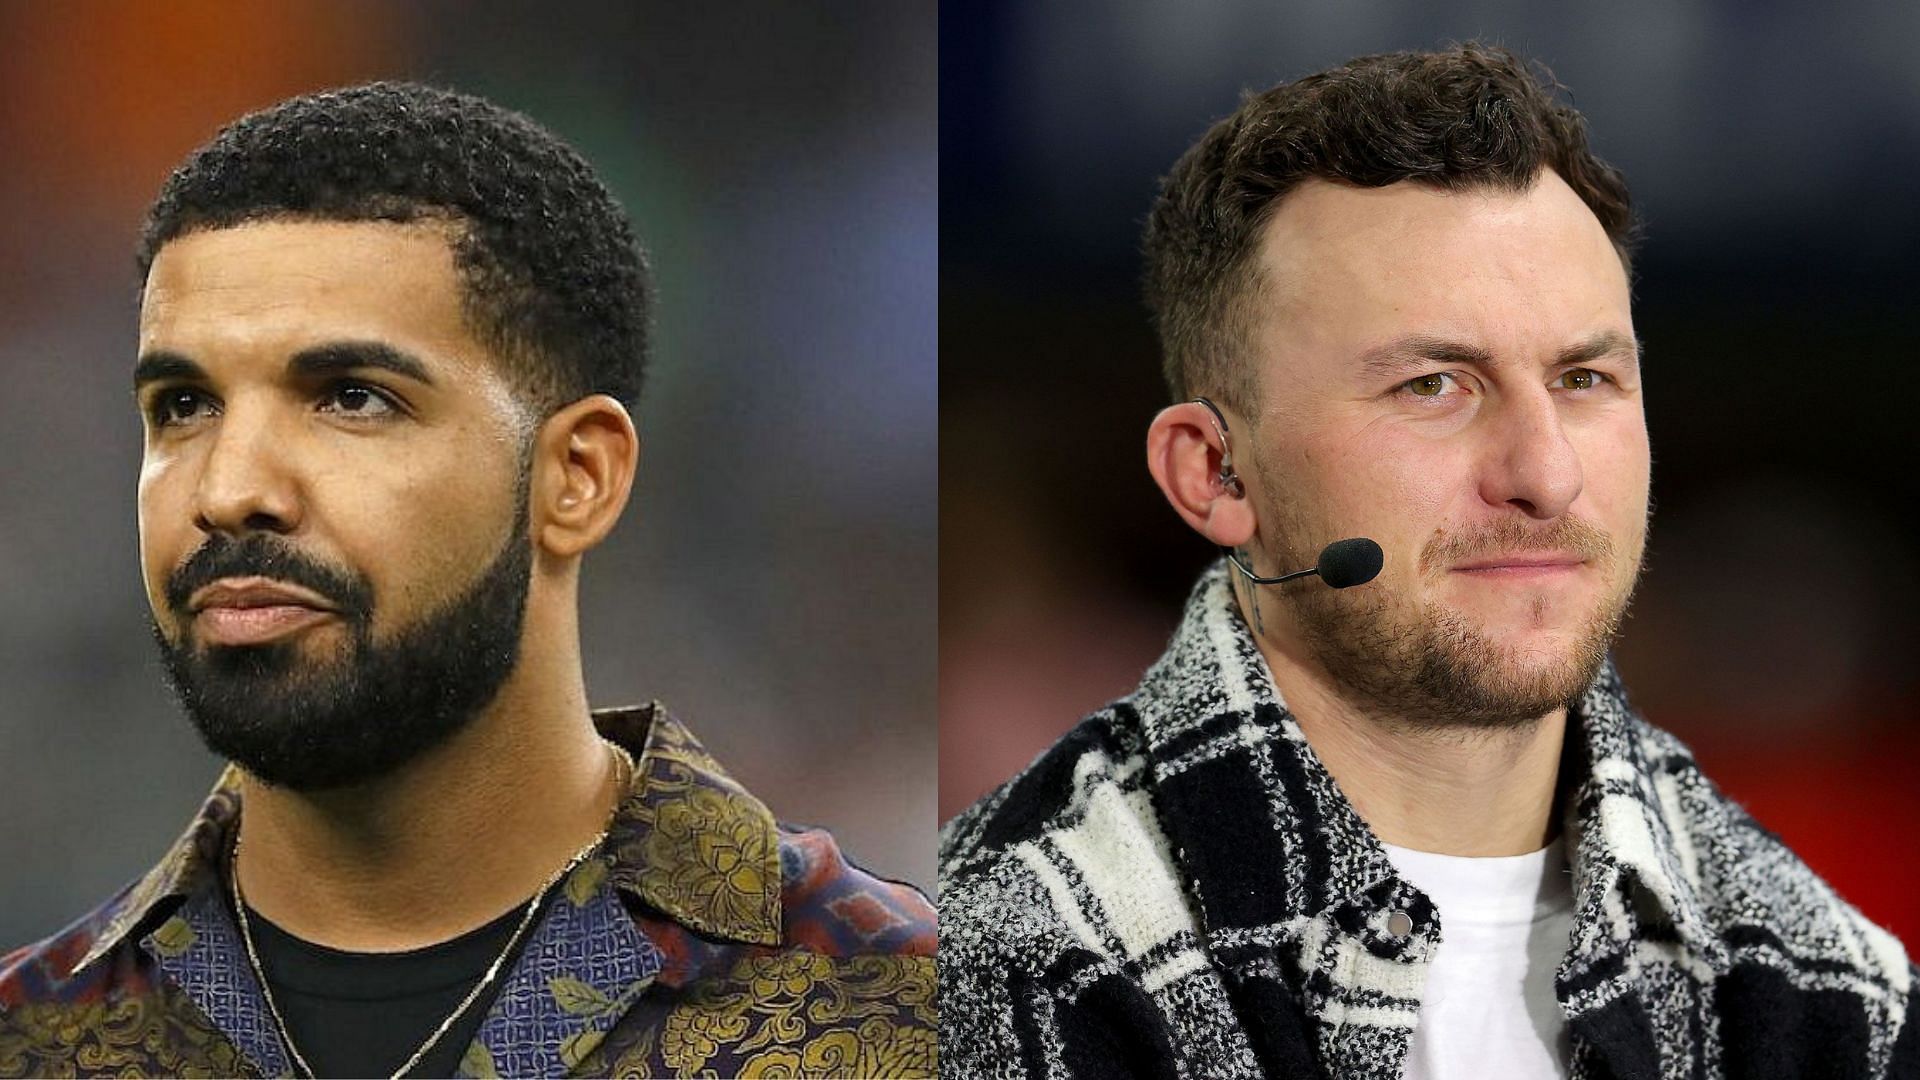 Drake (L) suggested more wild stories with former QB Johnny Manziel (R)